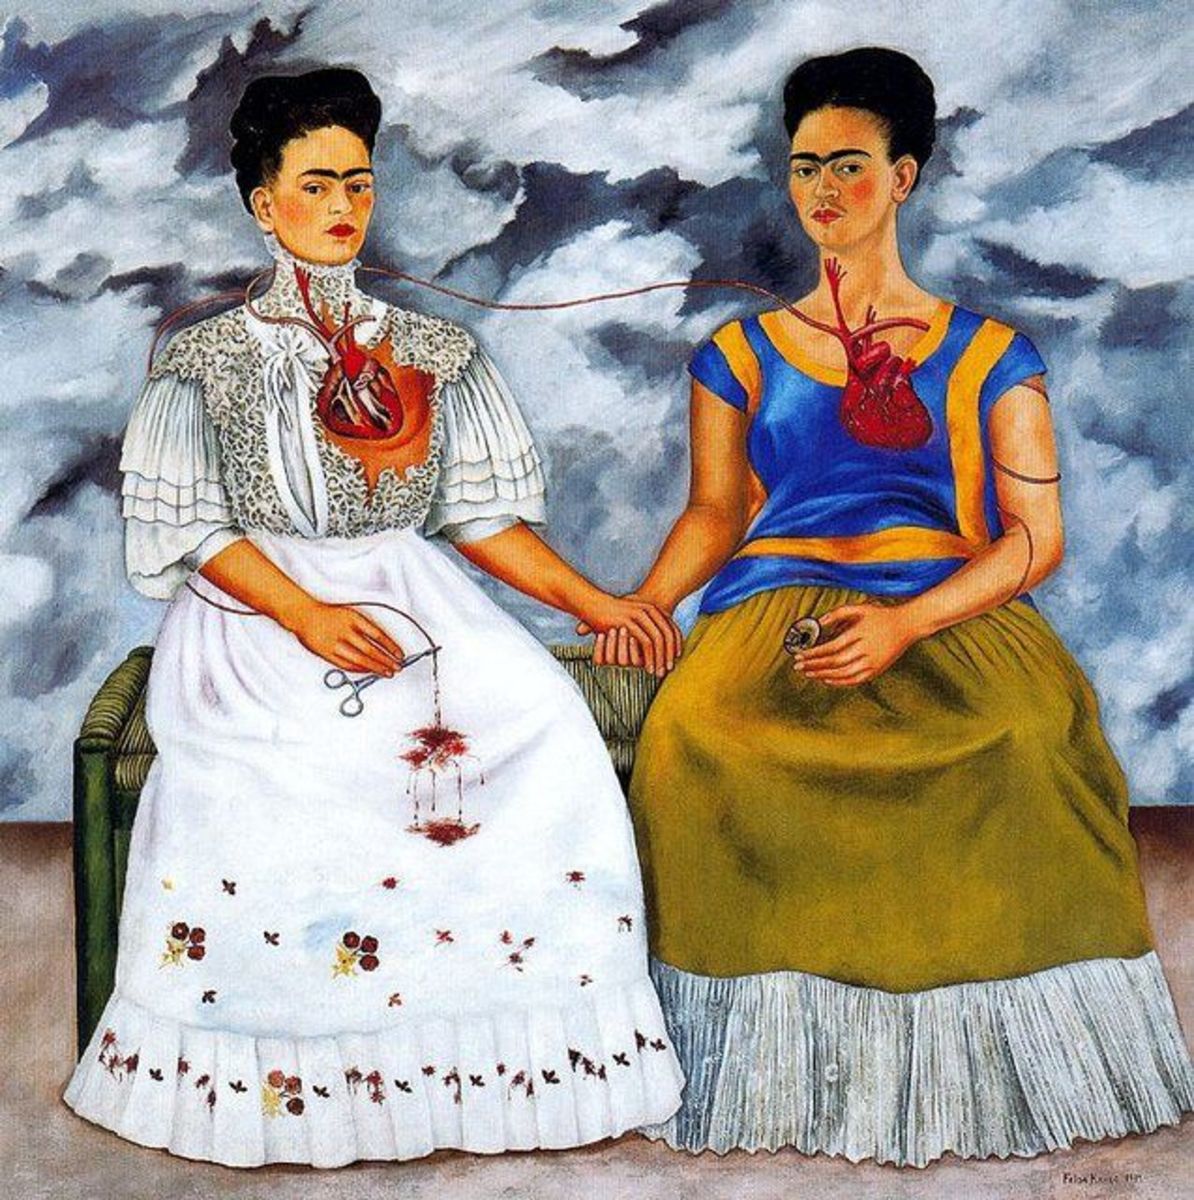 "The Two Frida's" (1939)